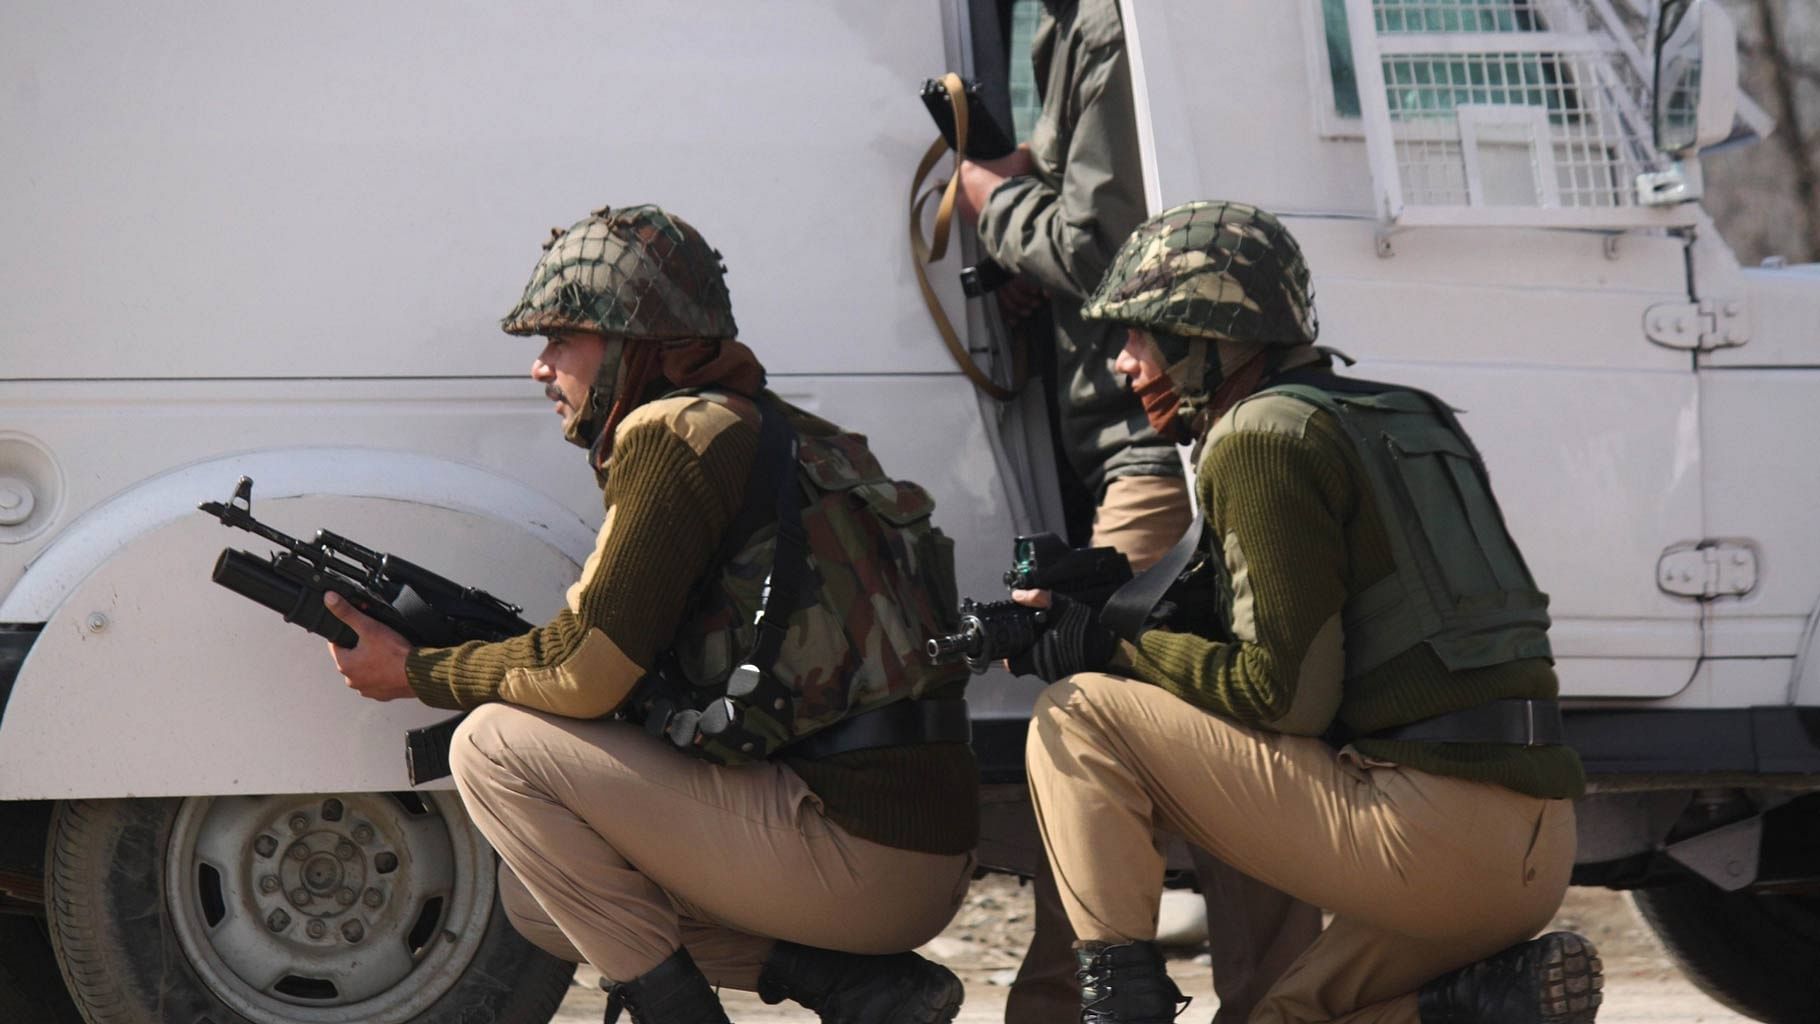 Army jawans take position during an encounter with militants in Pampore area of Jammu and Kashmir’s Pulwama district. Image used for representation here.